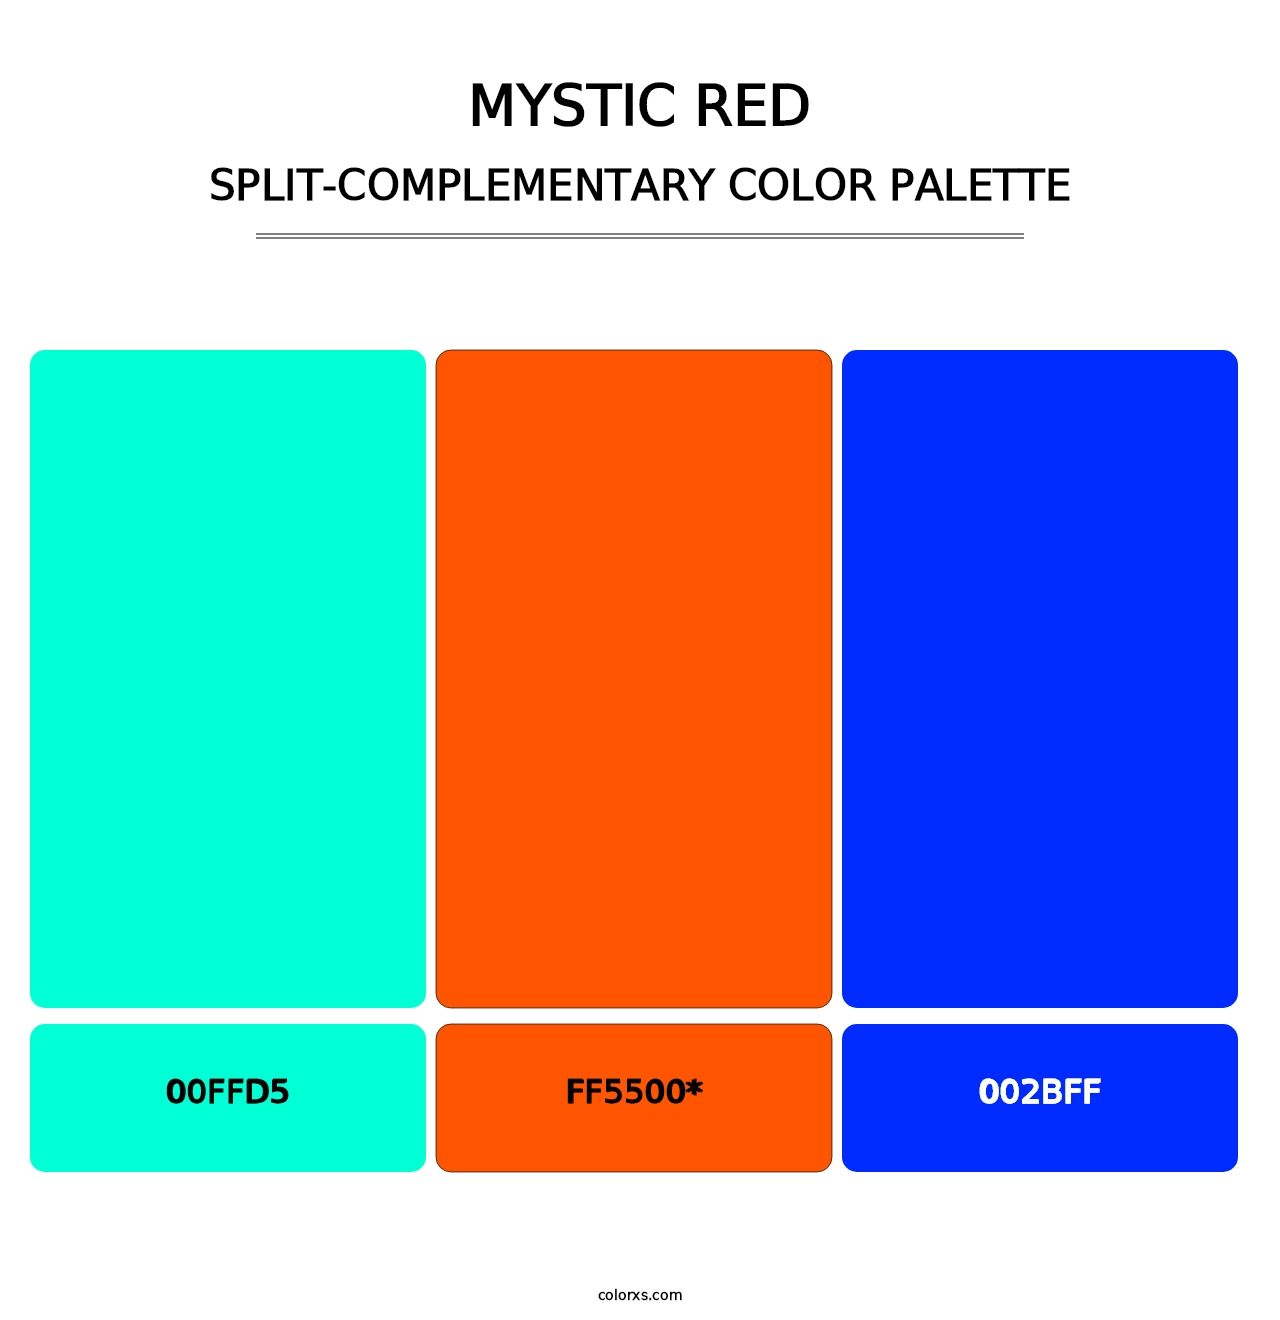 Mystic Red - Split-Complementary Color Palette